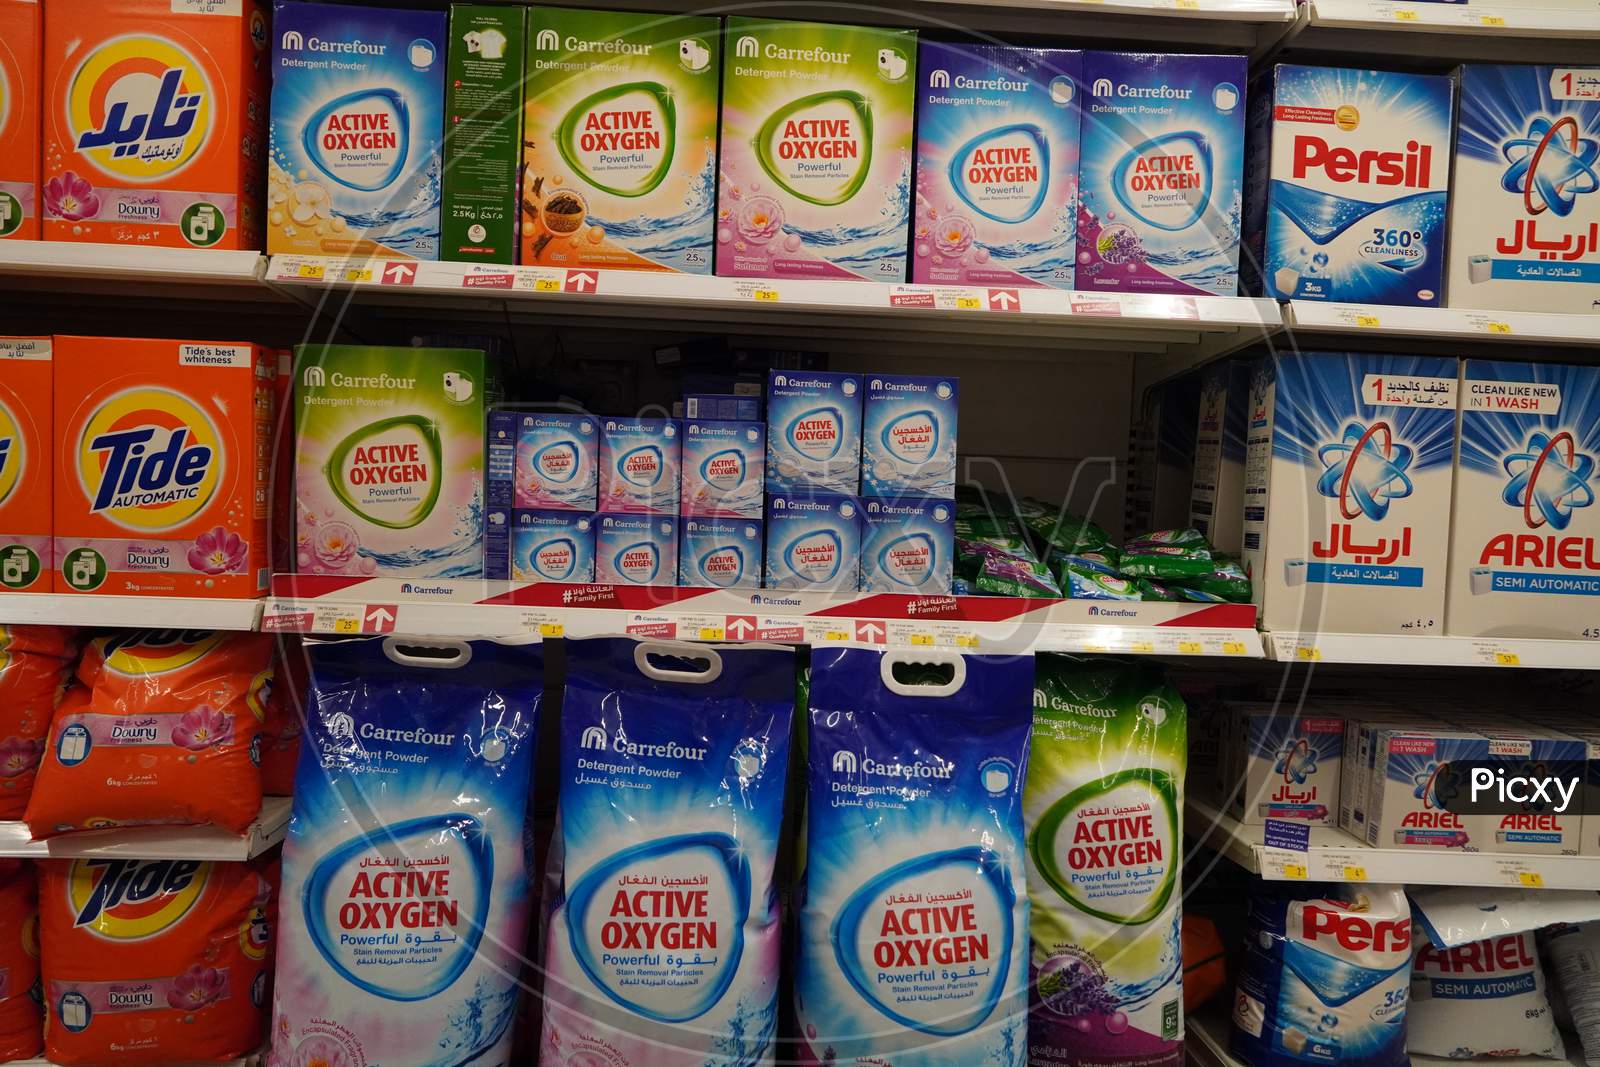 Supermarket Display With Different Brands Of Washing Powder In Boxes. Wholesale. Tide, Ariel, Omo Laundry Detergent Boxes Lined Up For Sale In A Store Shelf- Dubai Uae December 2019